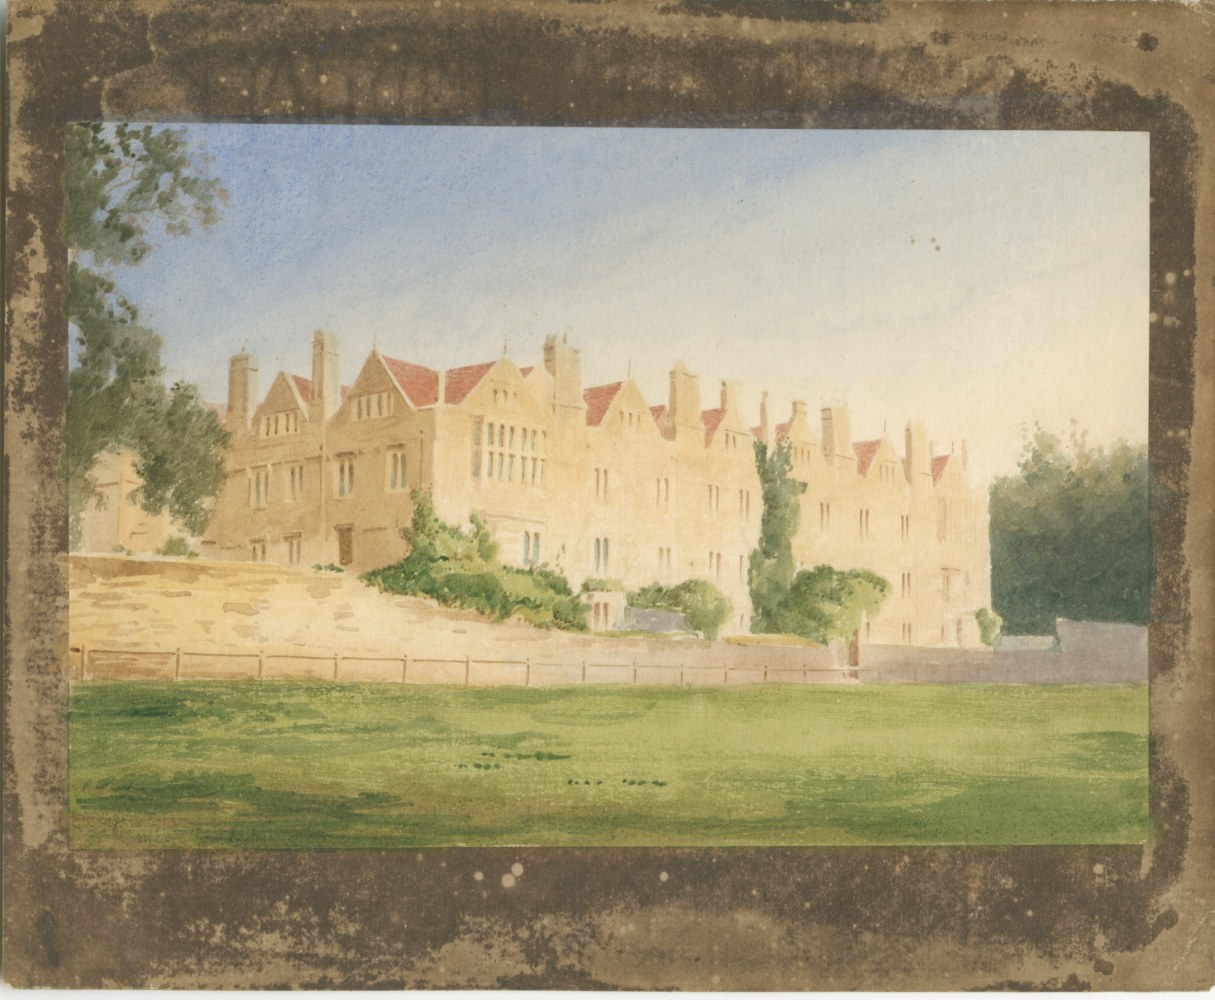 William Henry Fox TALBOT (English, 1800-1877) Merton College from the fields, Oxford, circa 1843 Hand colored (possibly by André Mansion) salt print, from a calotype negative 13.6 x 20.2 cm